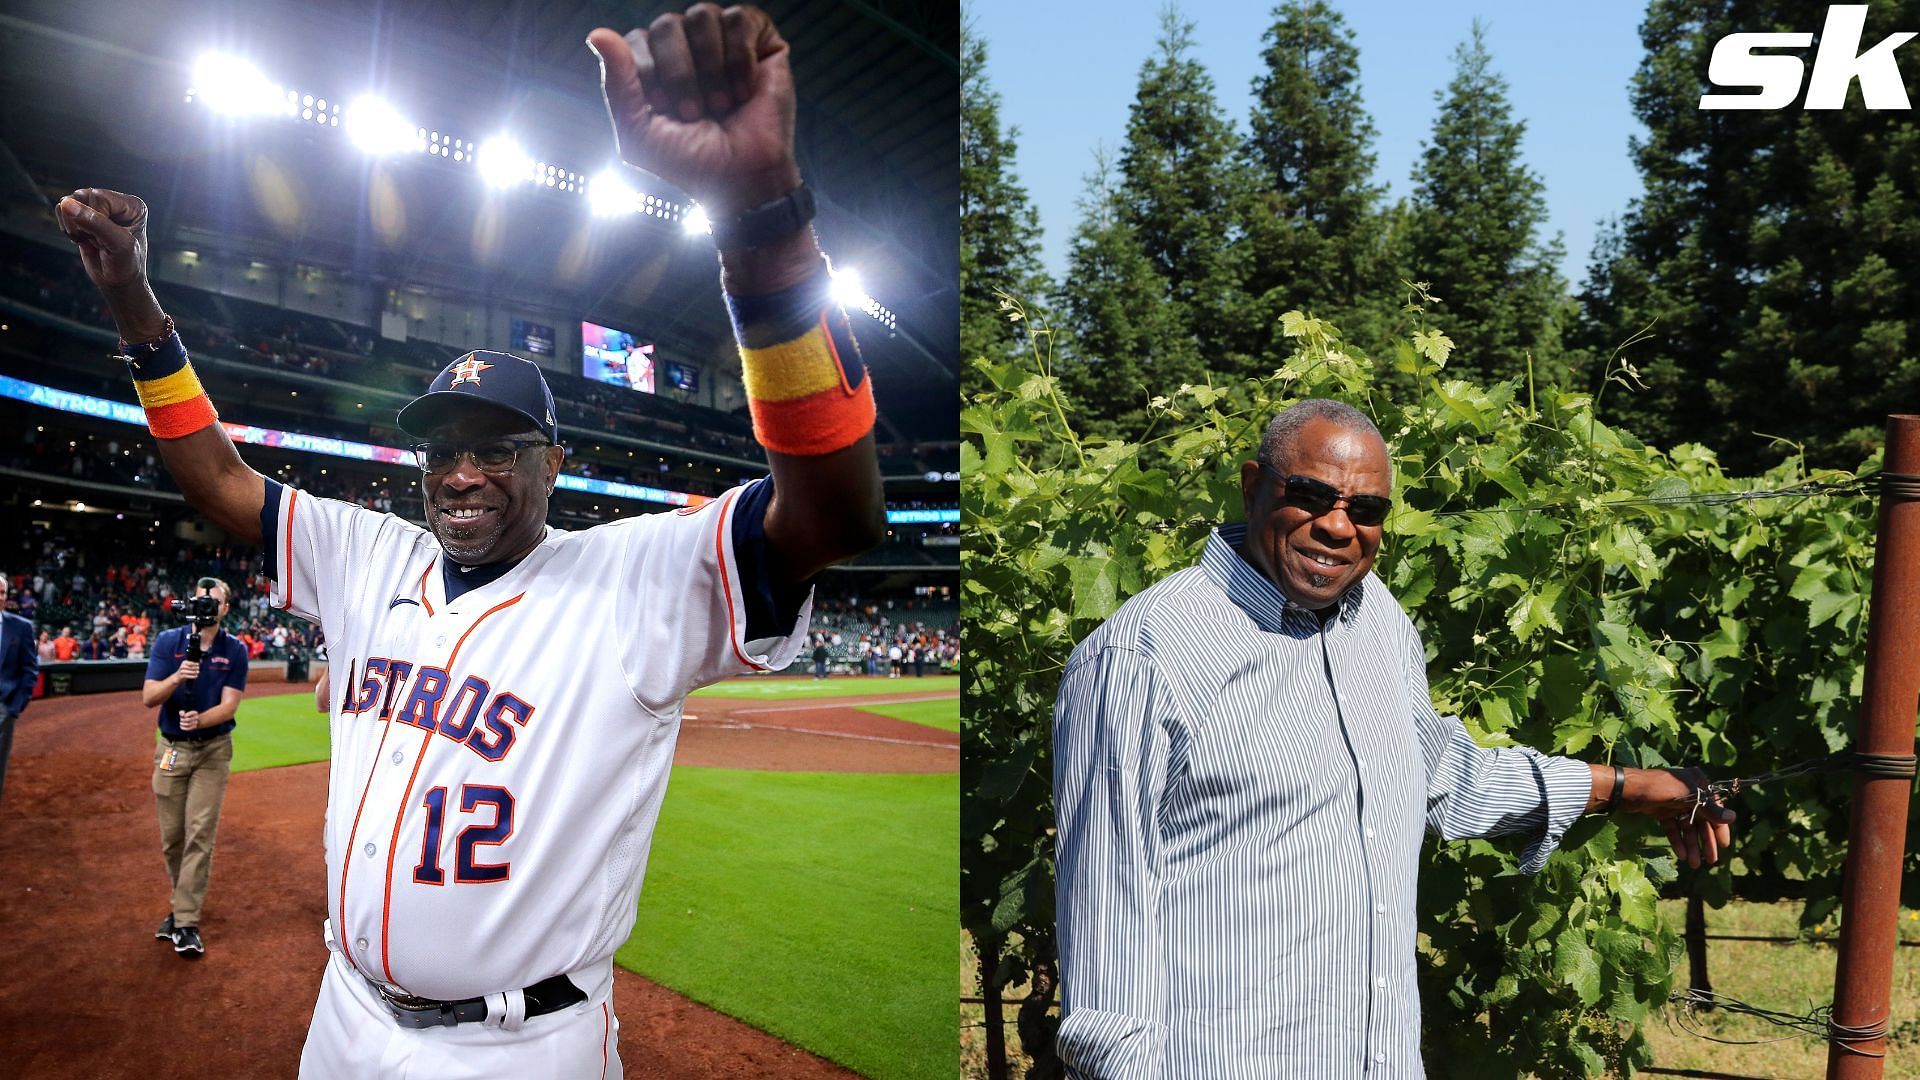 Dusty Baker was motivated to start his own vineyard by a Baseball Hall of Famer. [Image Credit: https://www.bakerfamilywines.com/]